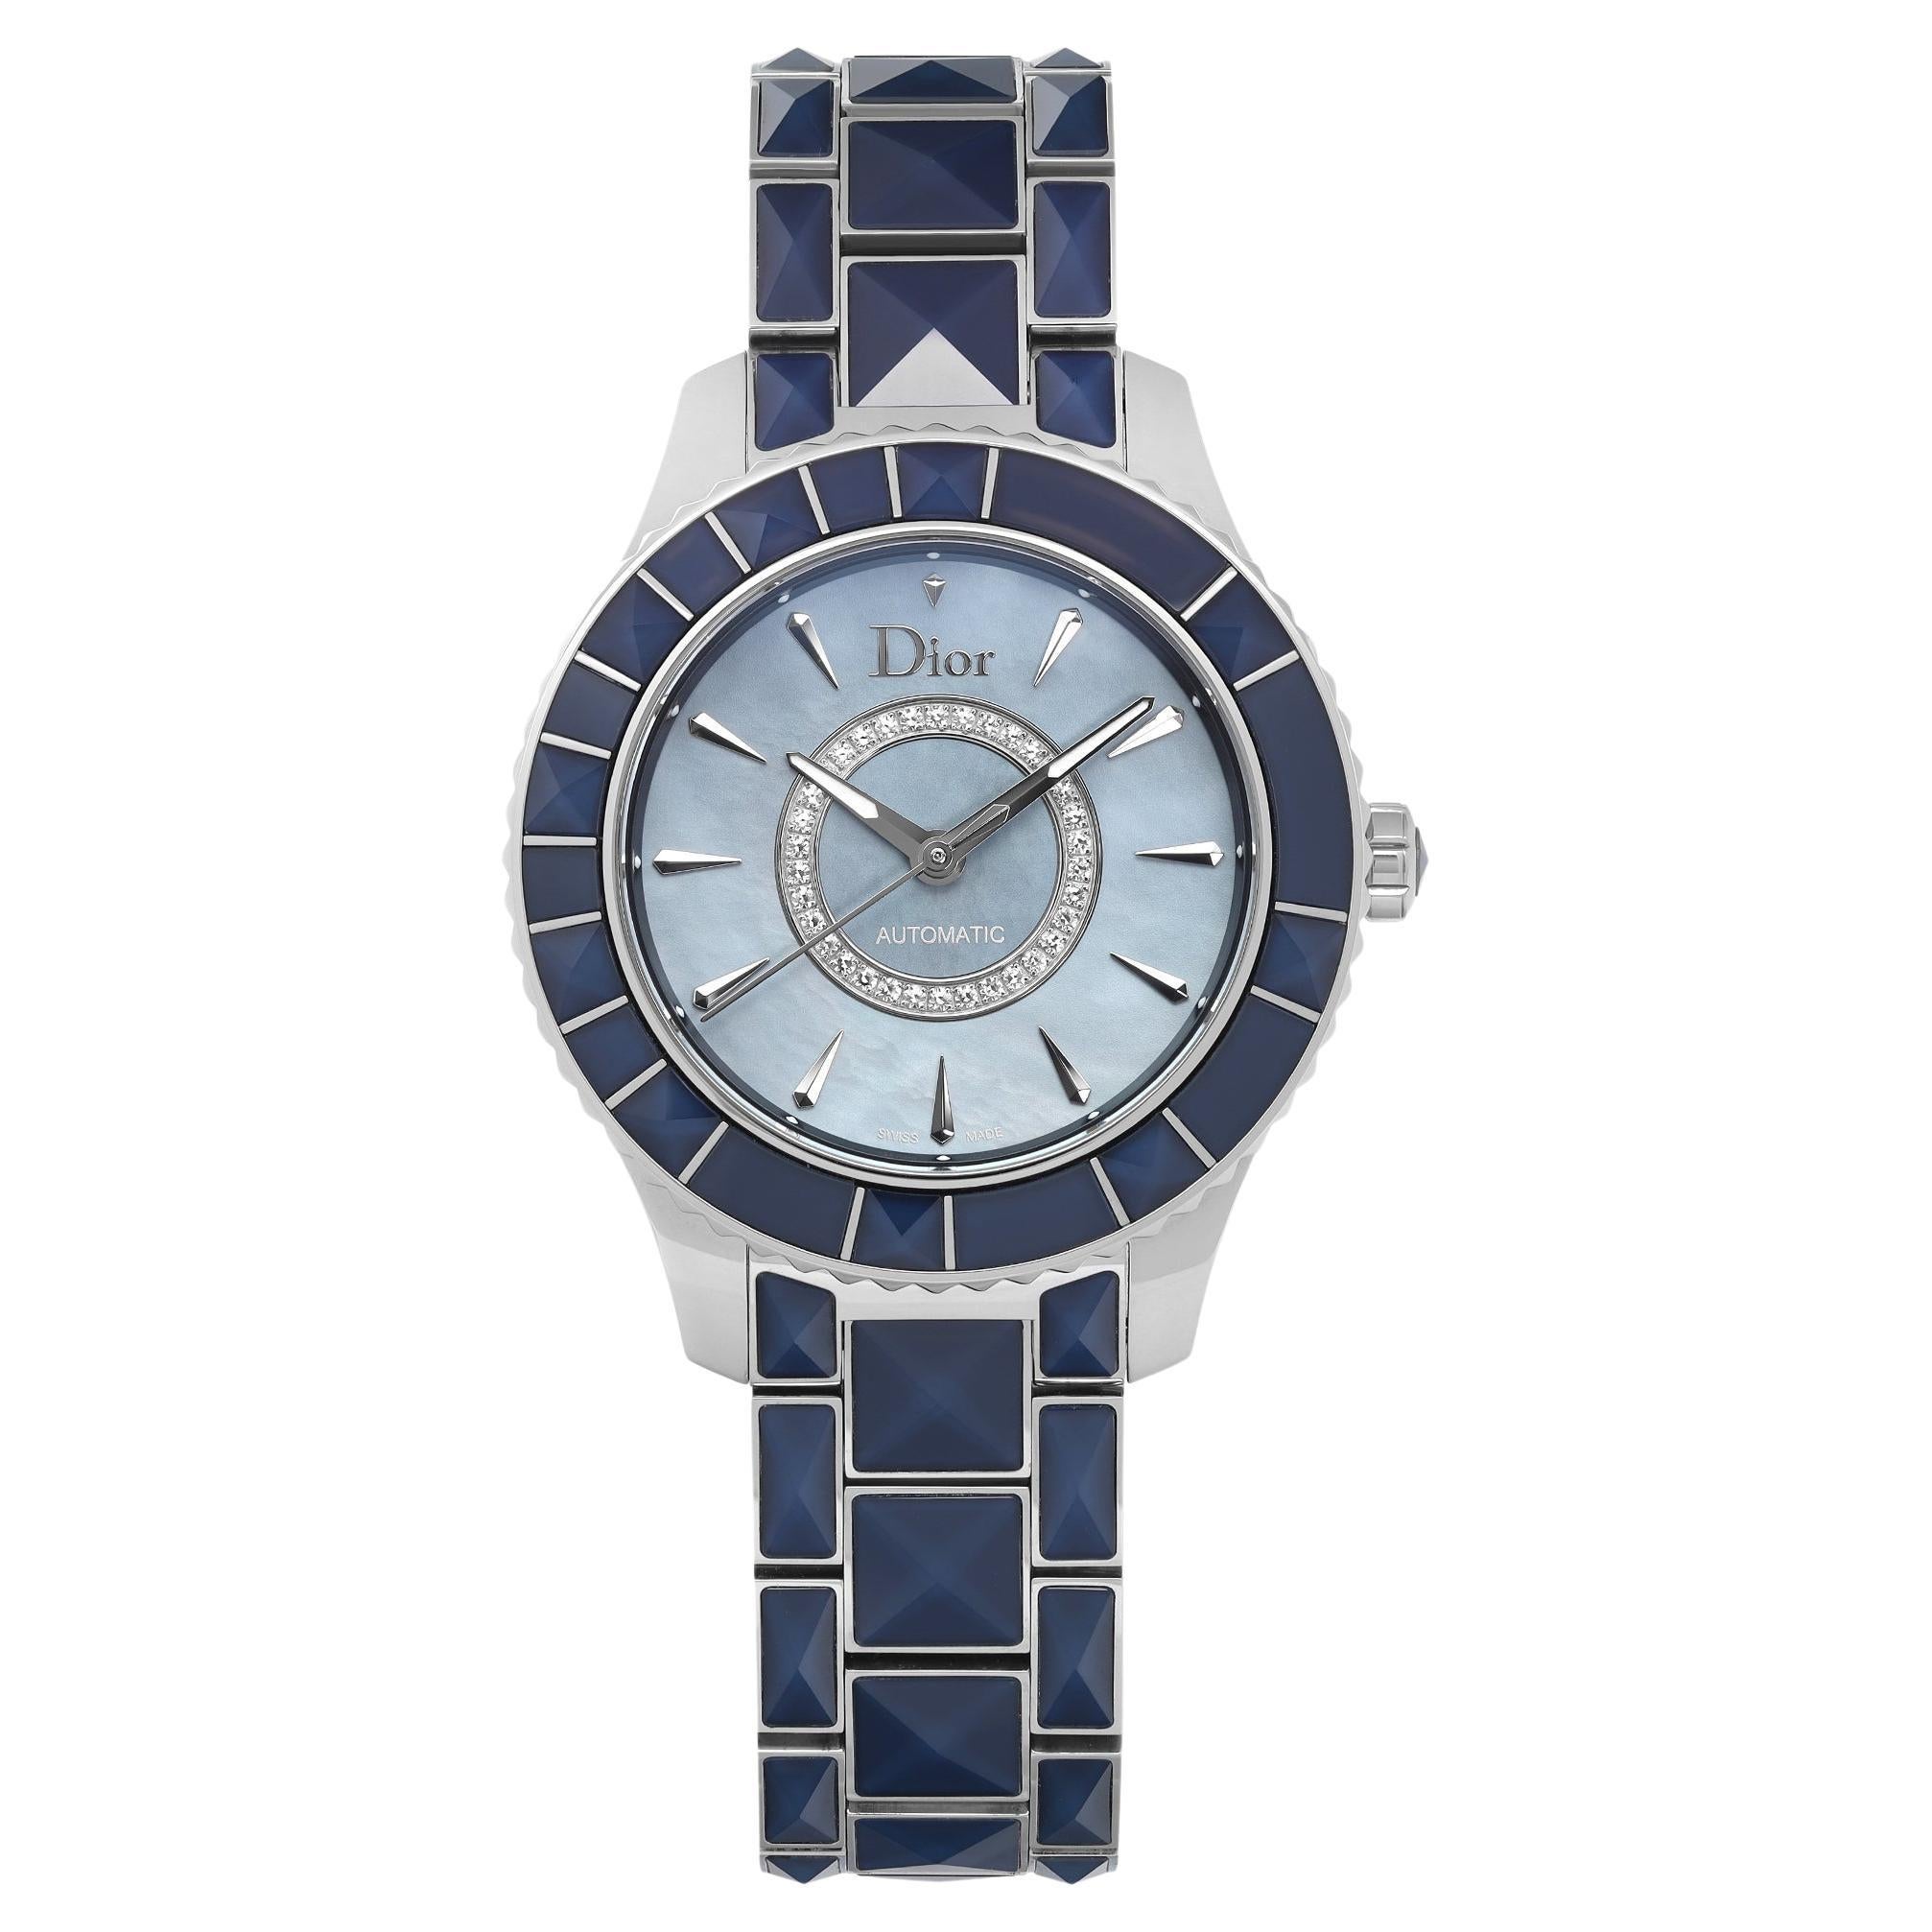 Christian Dior Christal Steel Blue MOP Diamond Dial Automatic Watch CD144517M001 For Sale